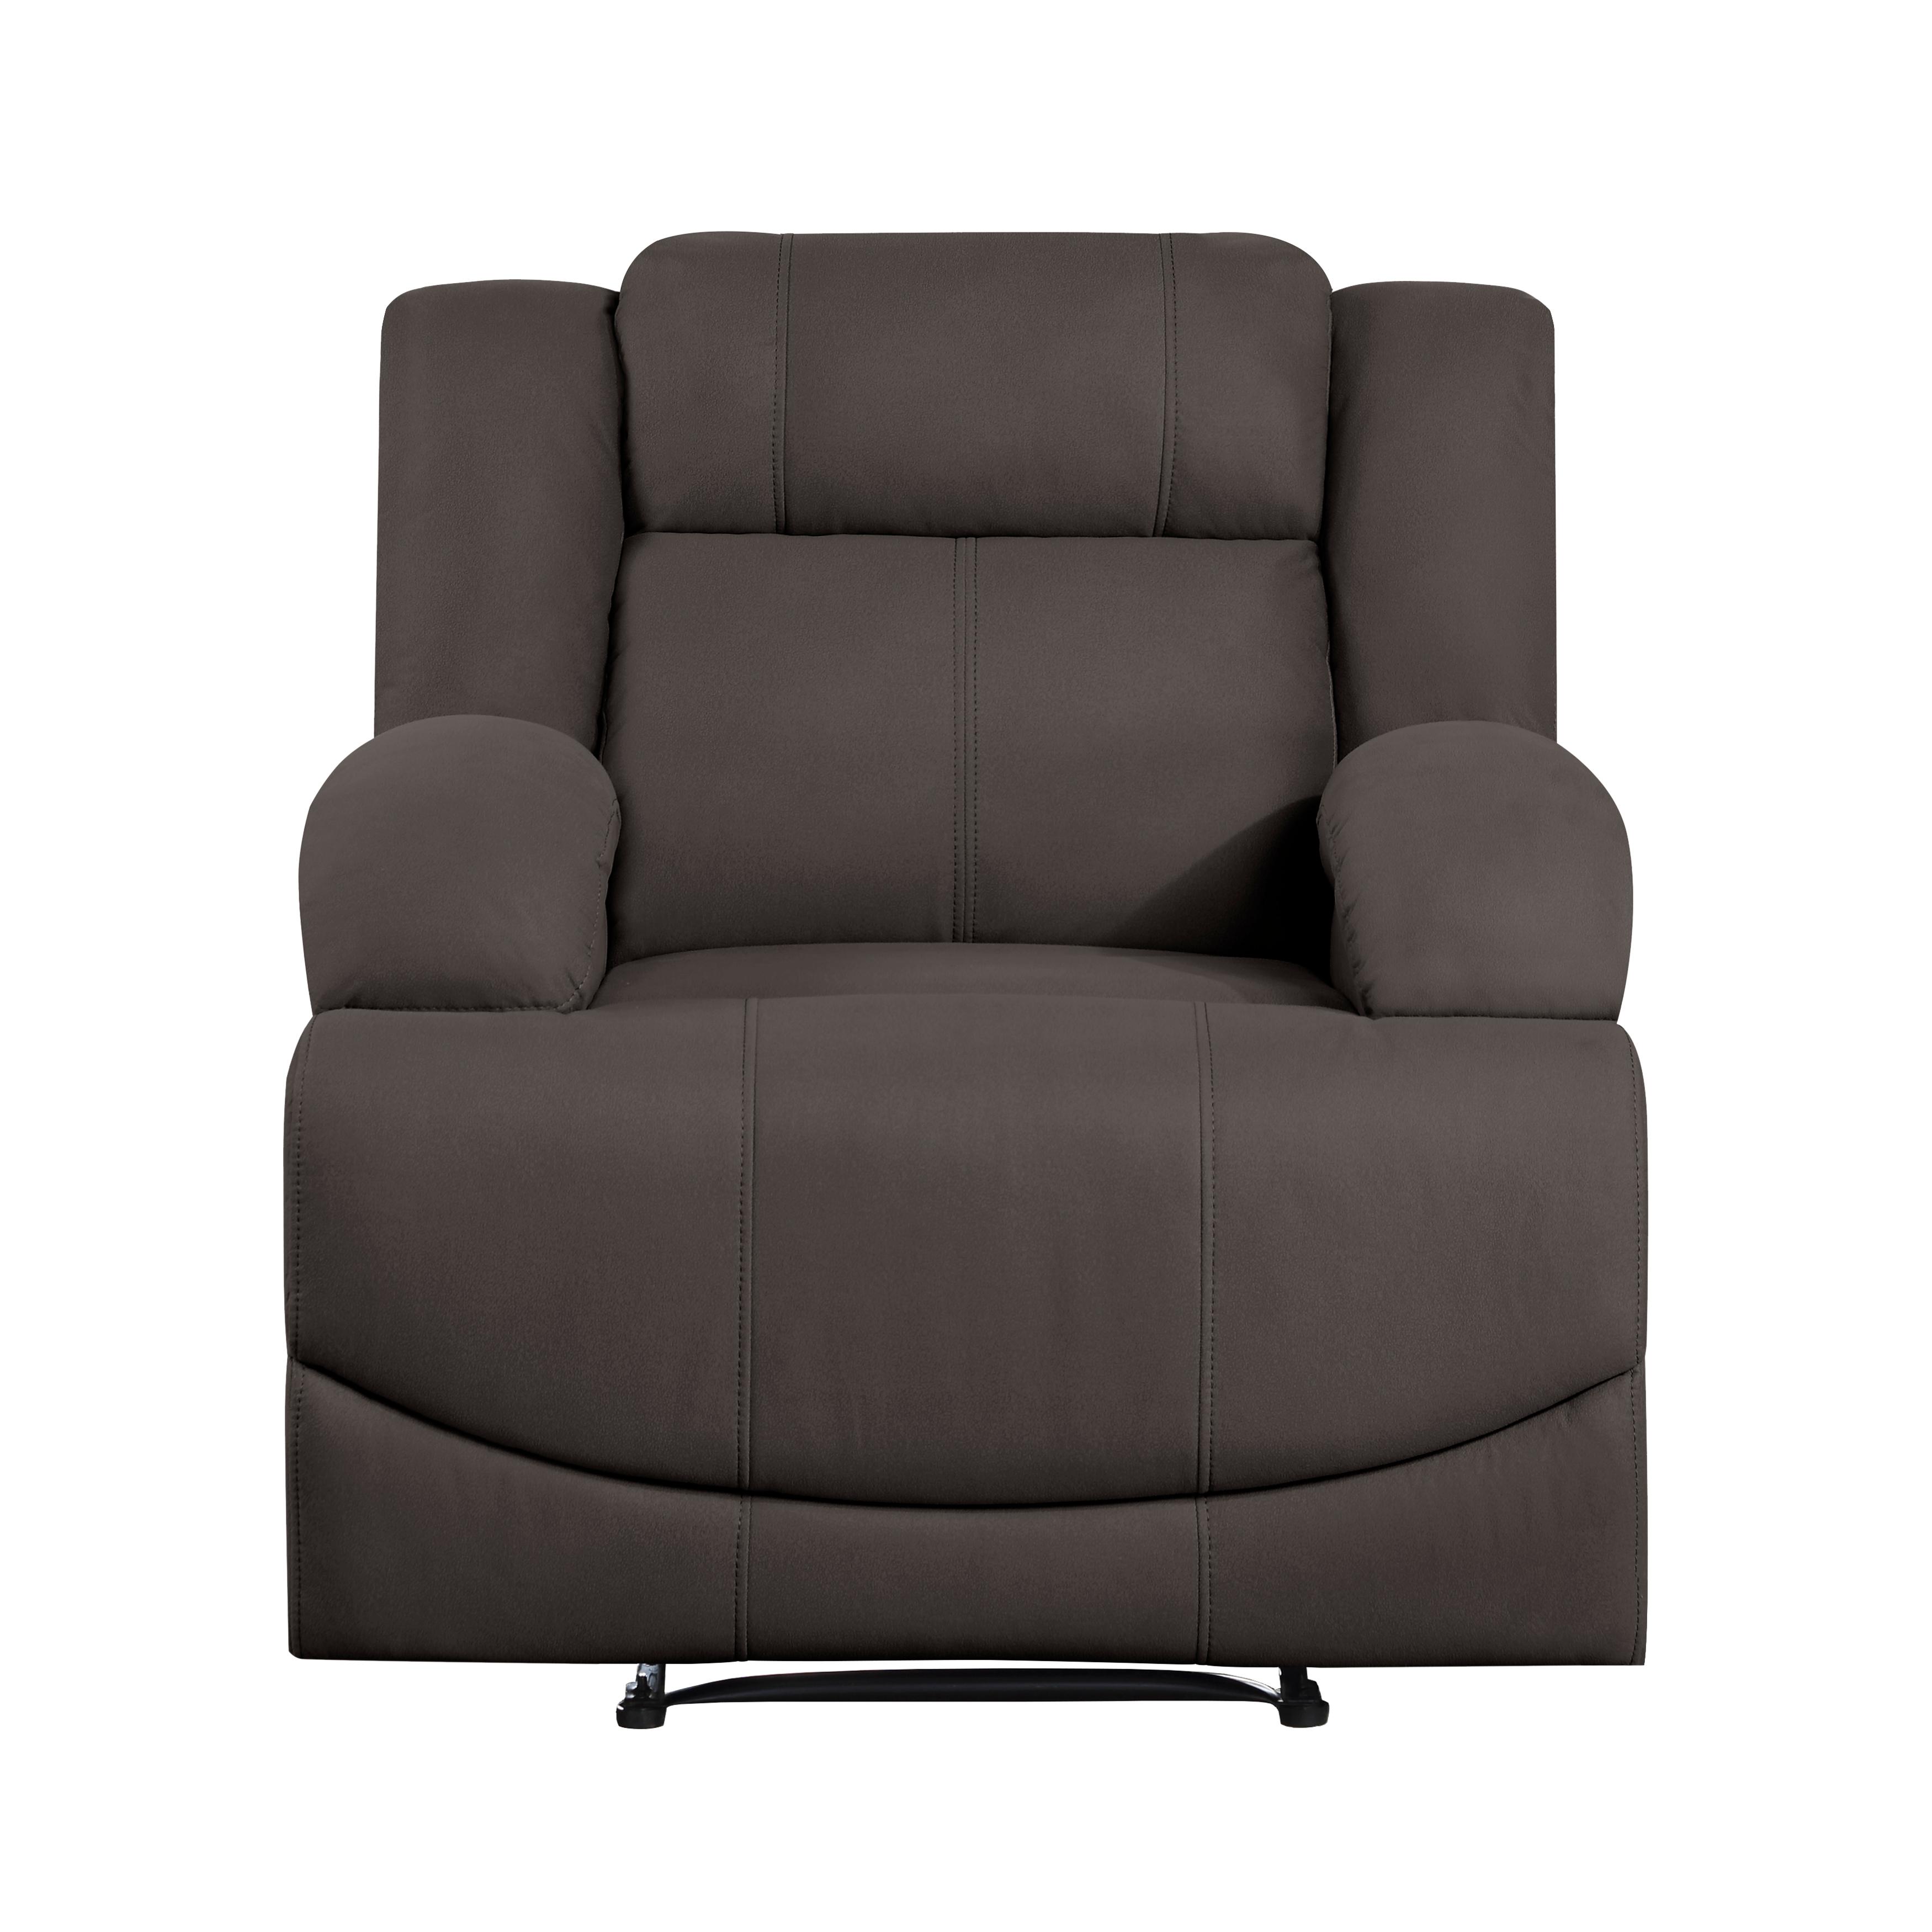 Transitional Reclining Chair 9207CHC-1 Camryn 9207CHC-1 in Chocolate Microfiber